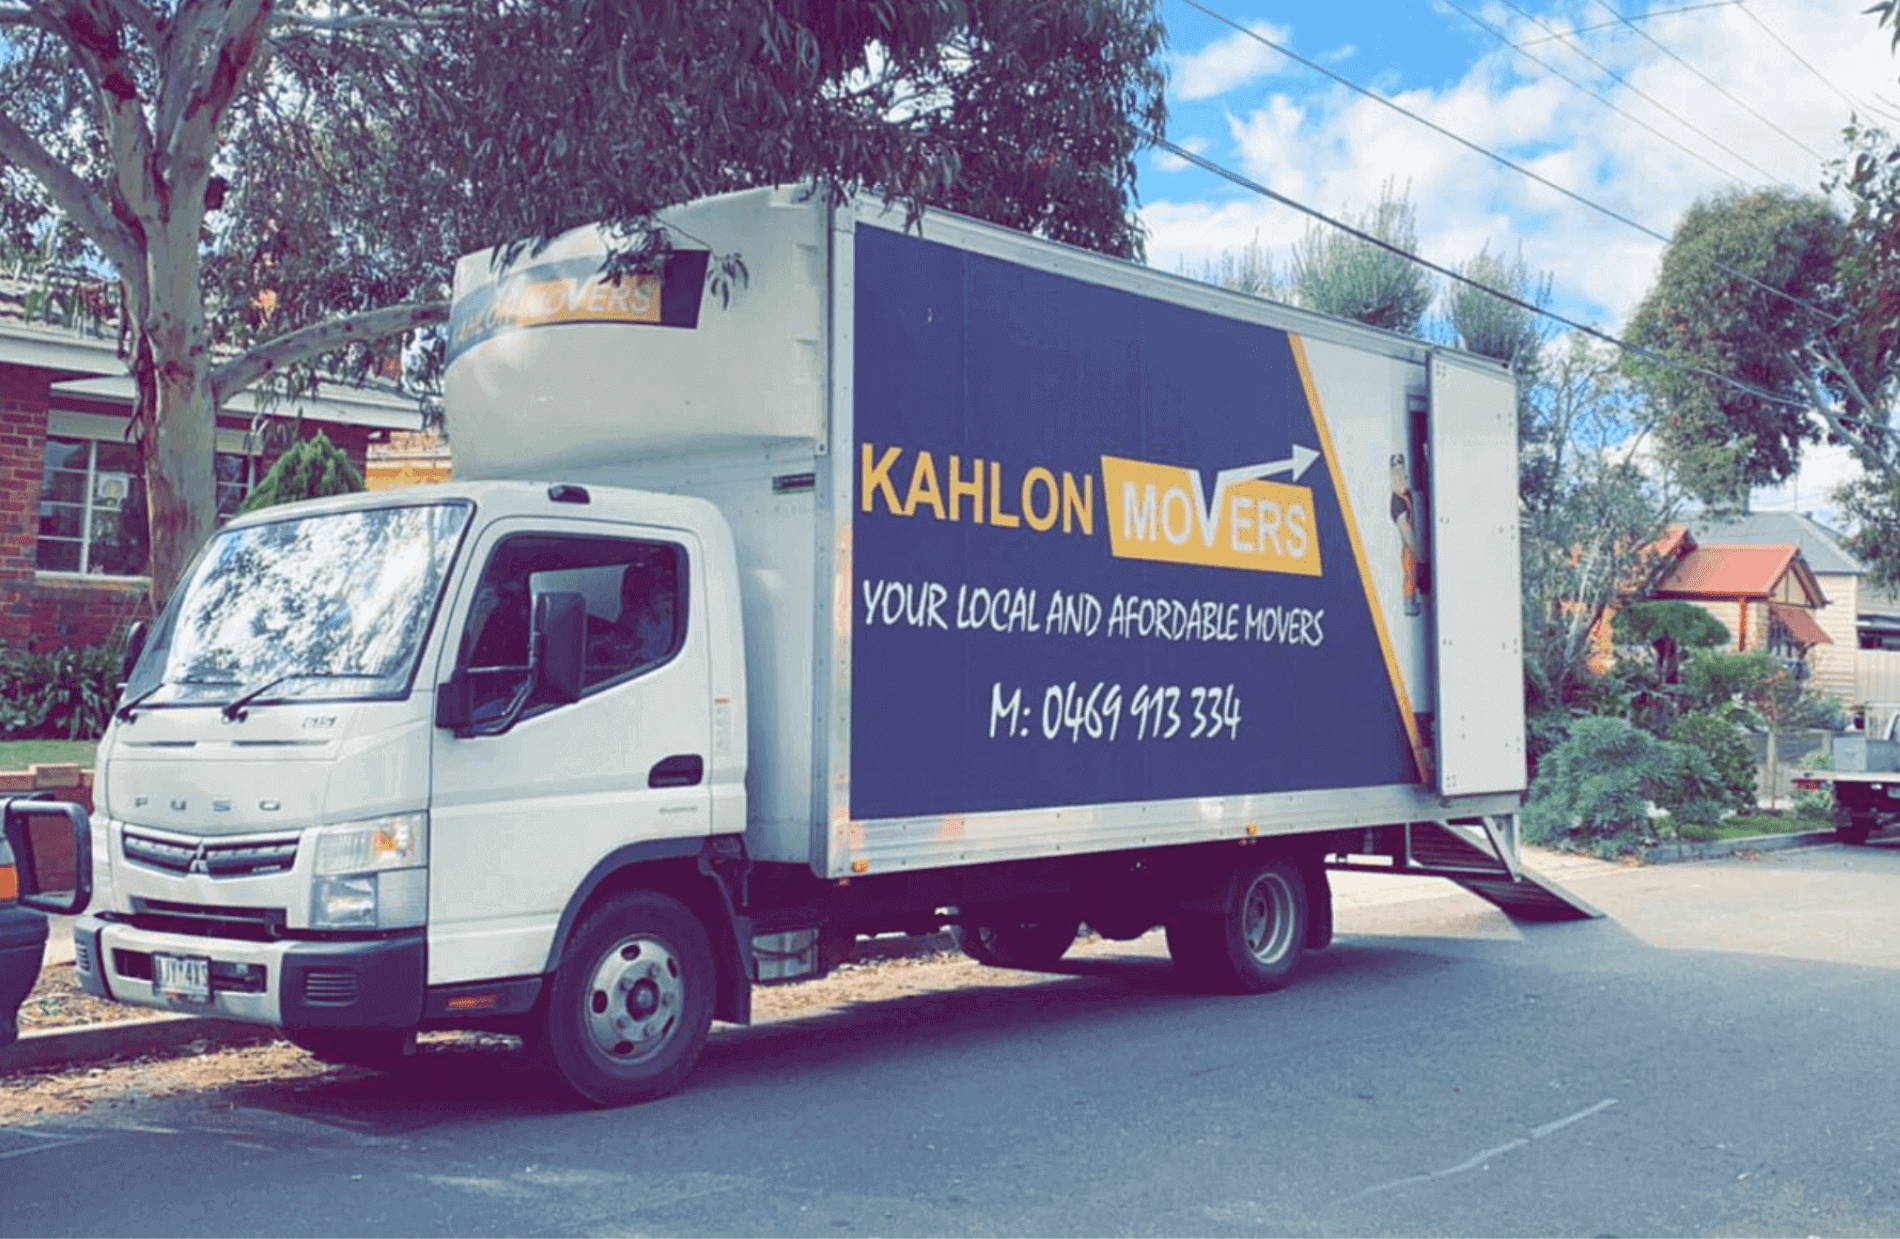 Kahlon Removals Melbourne - Your Local And Affordable Movers